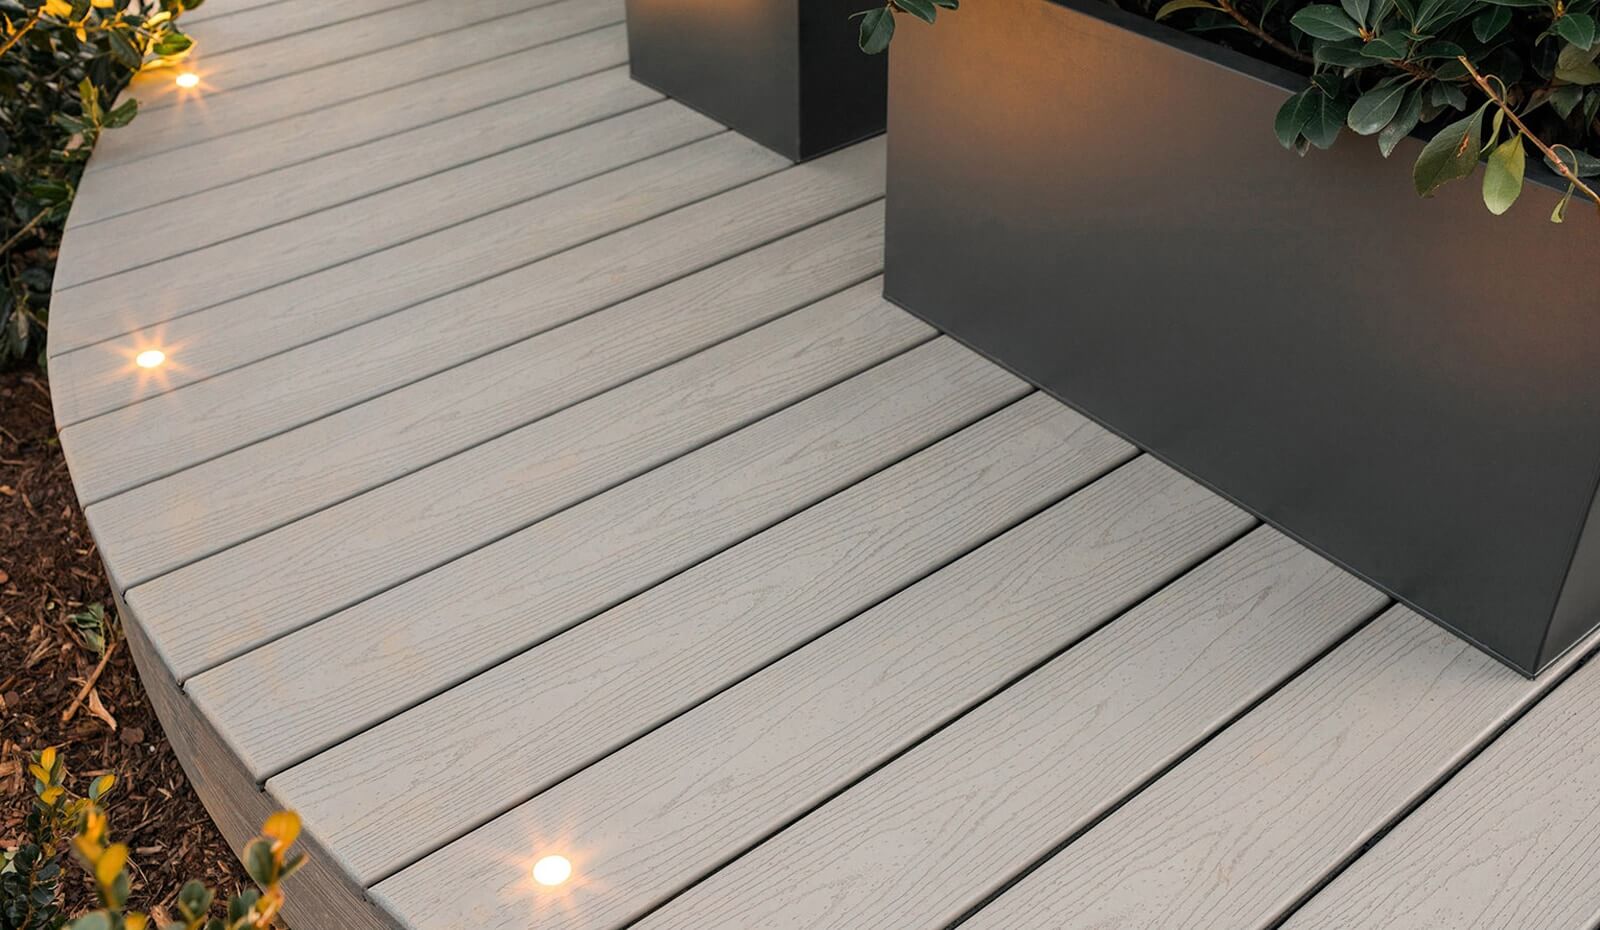 Deck close-up with lights